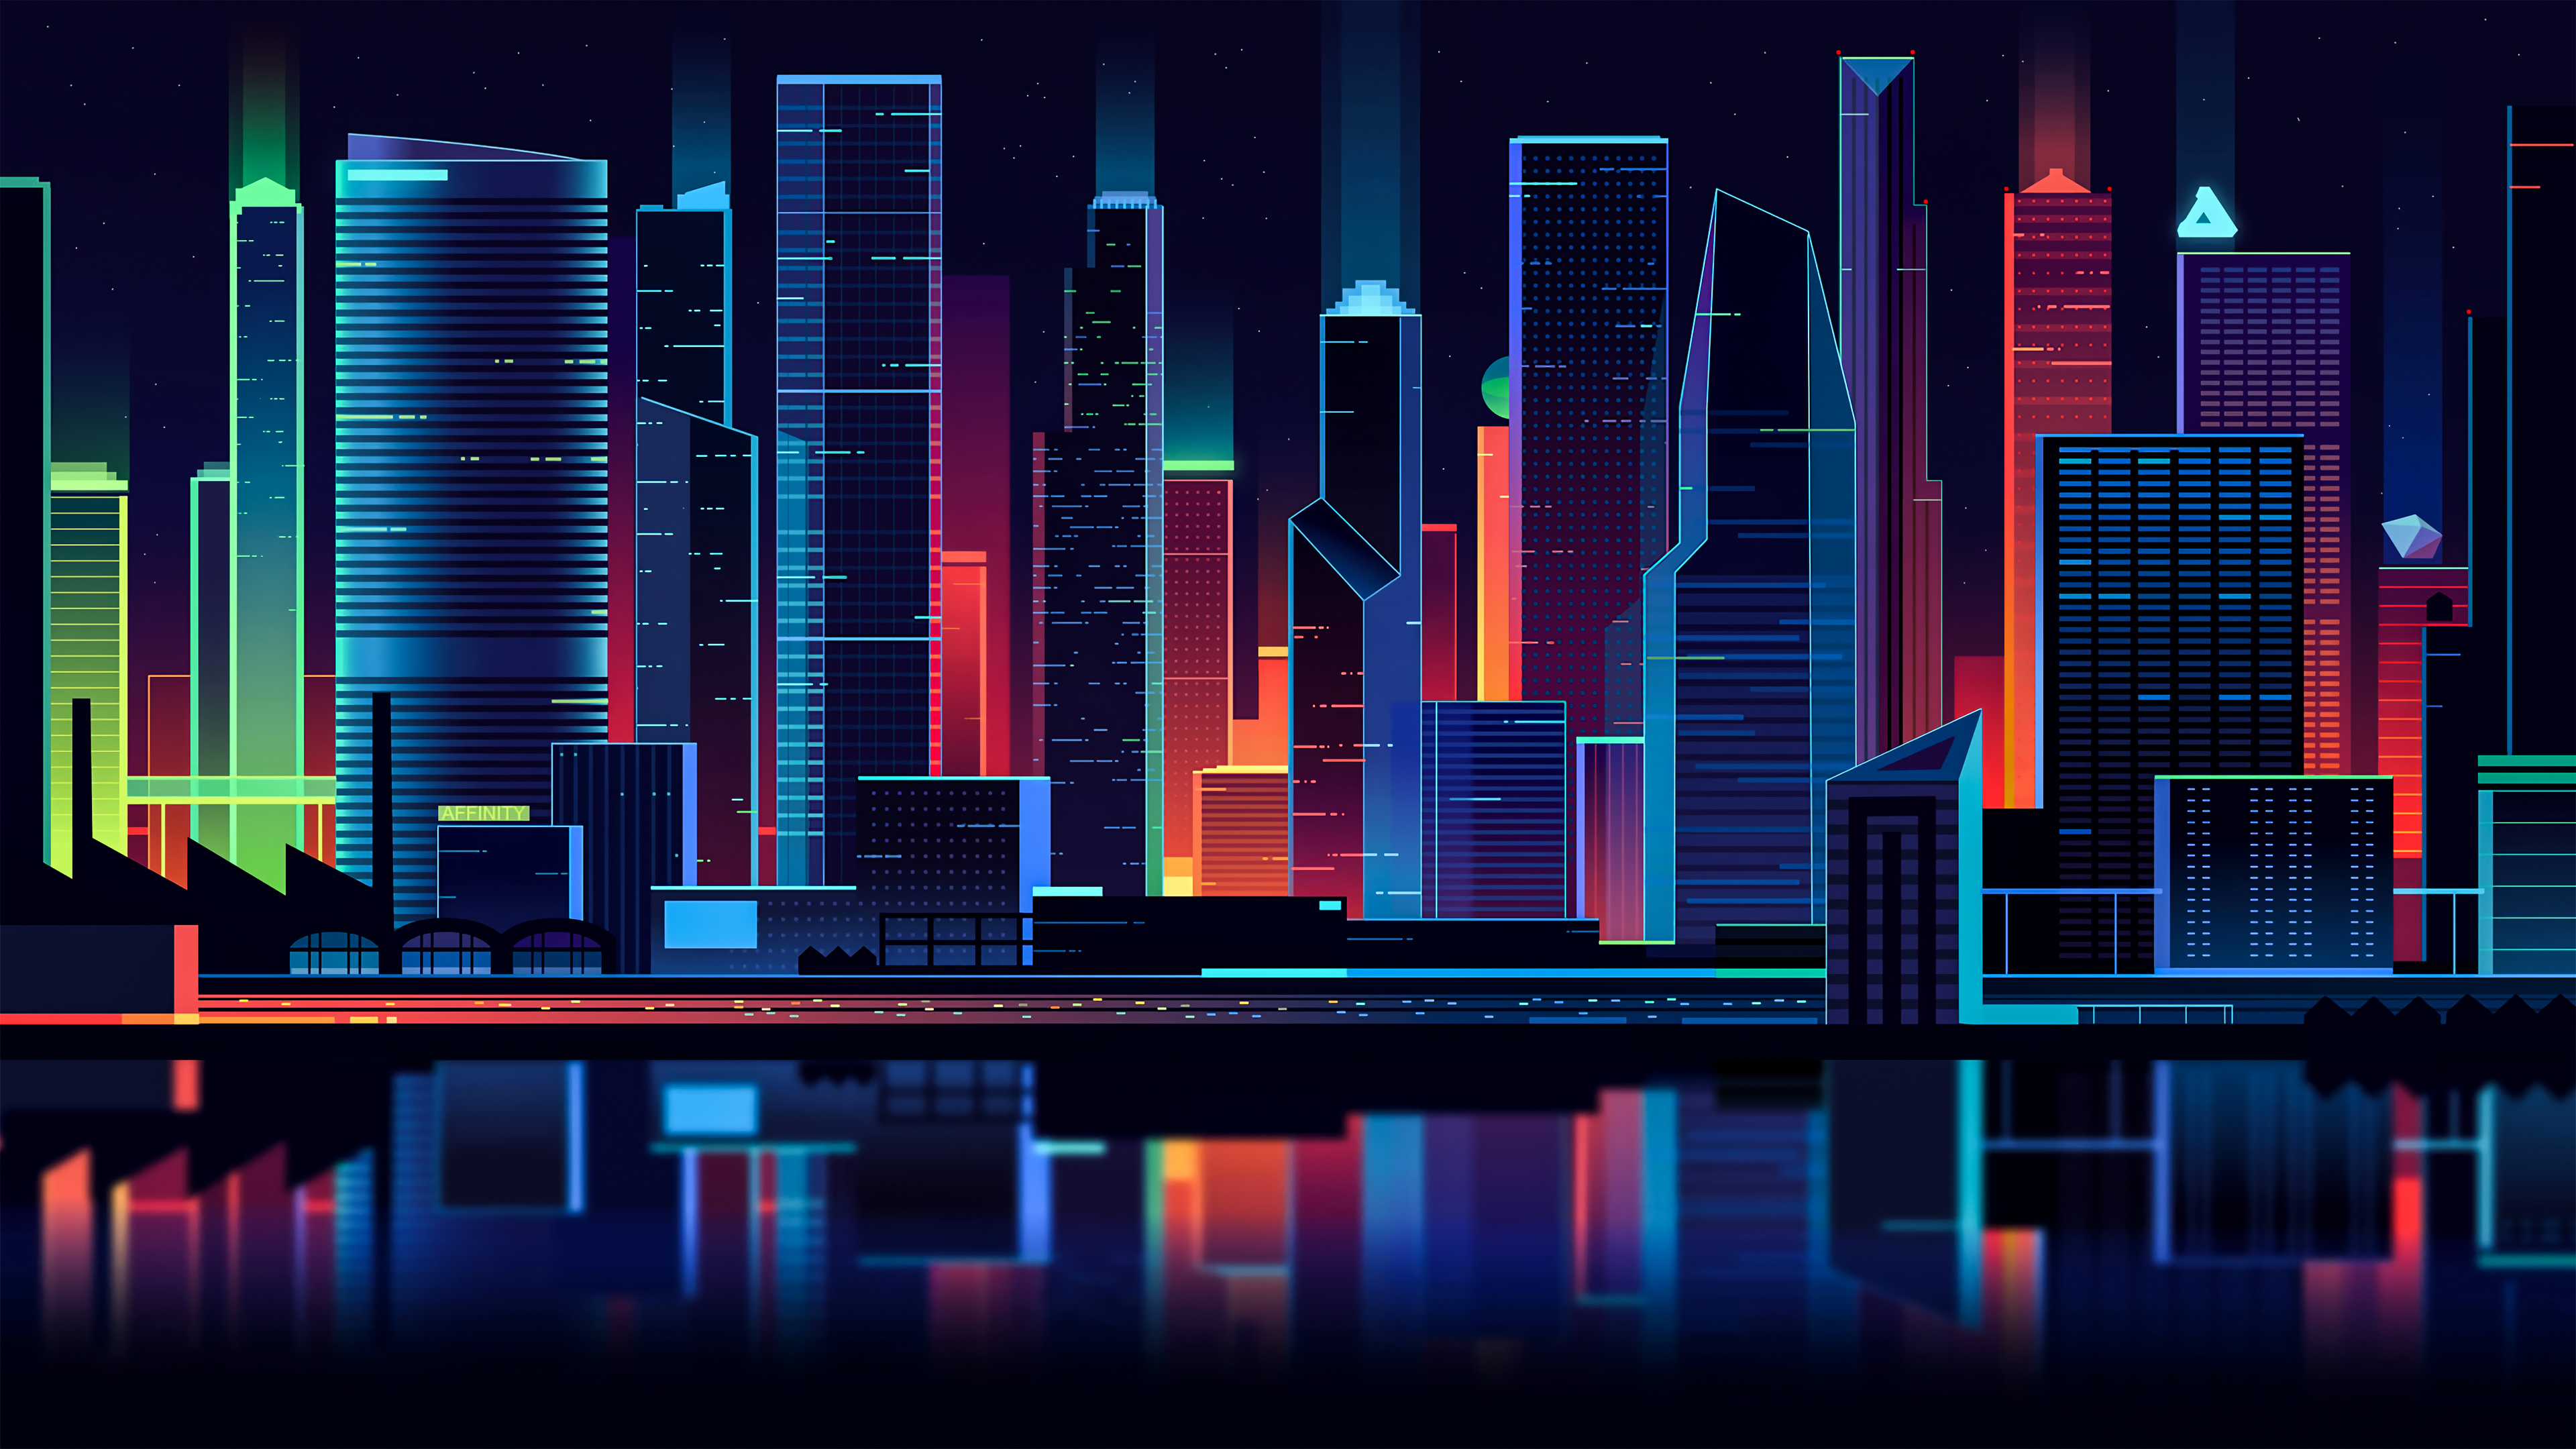 Affinity Skyline 4k, HD Artist, 4k Wallpaper, Image, Background, Photo and Picture